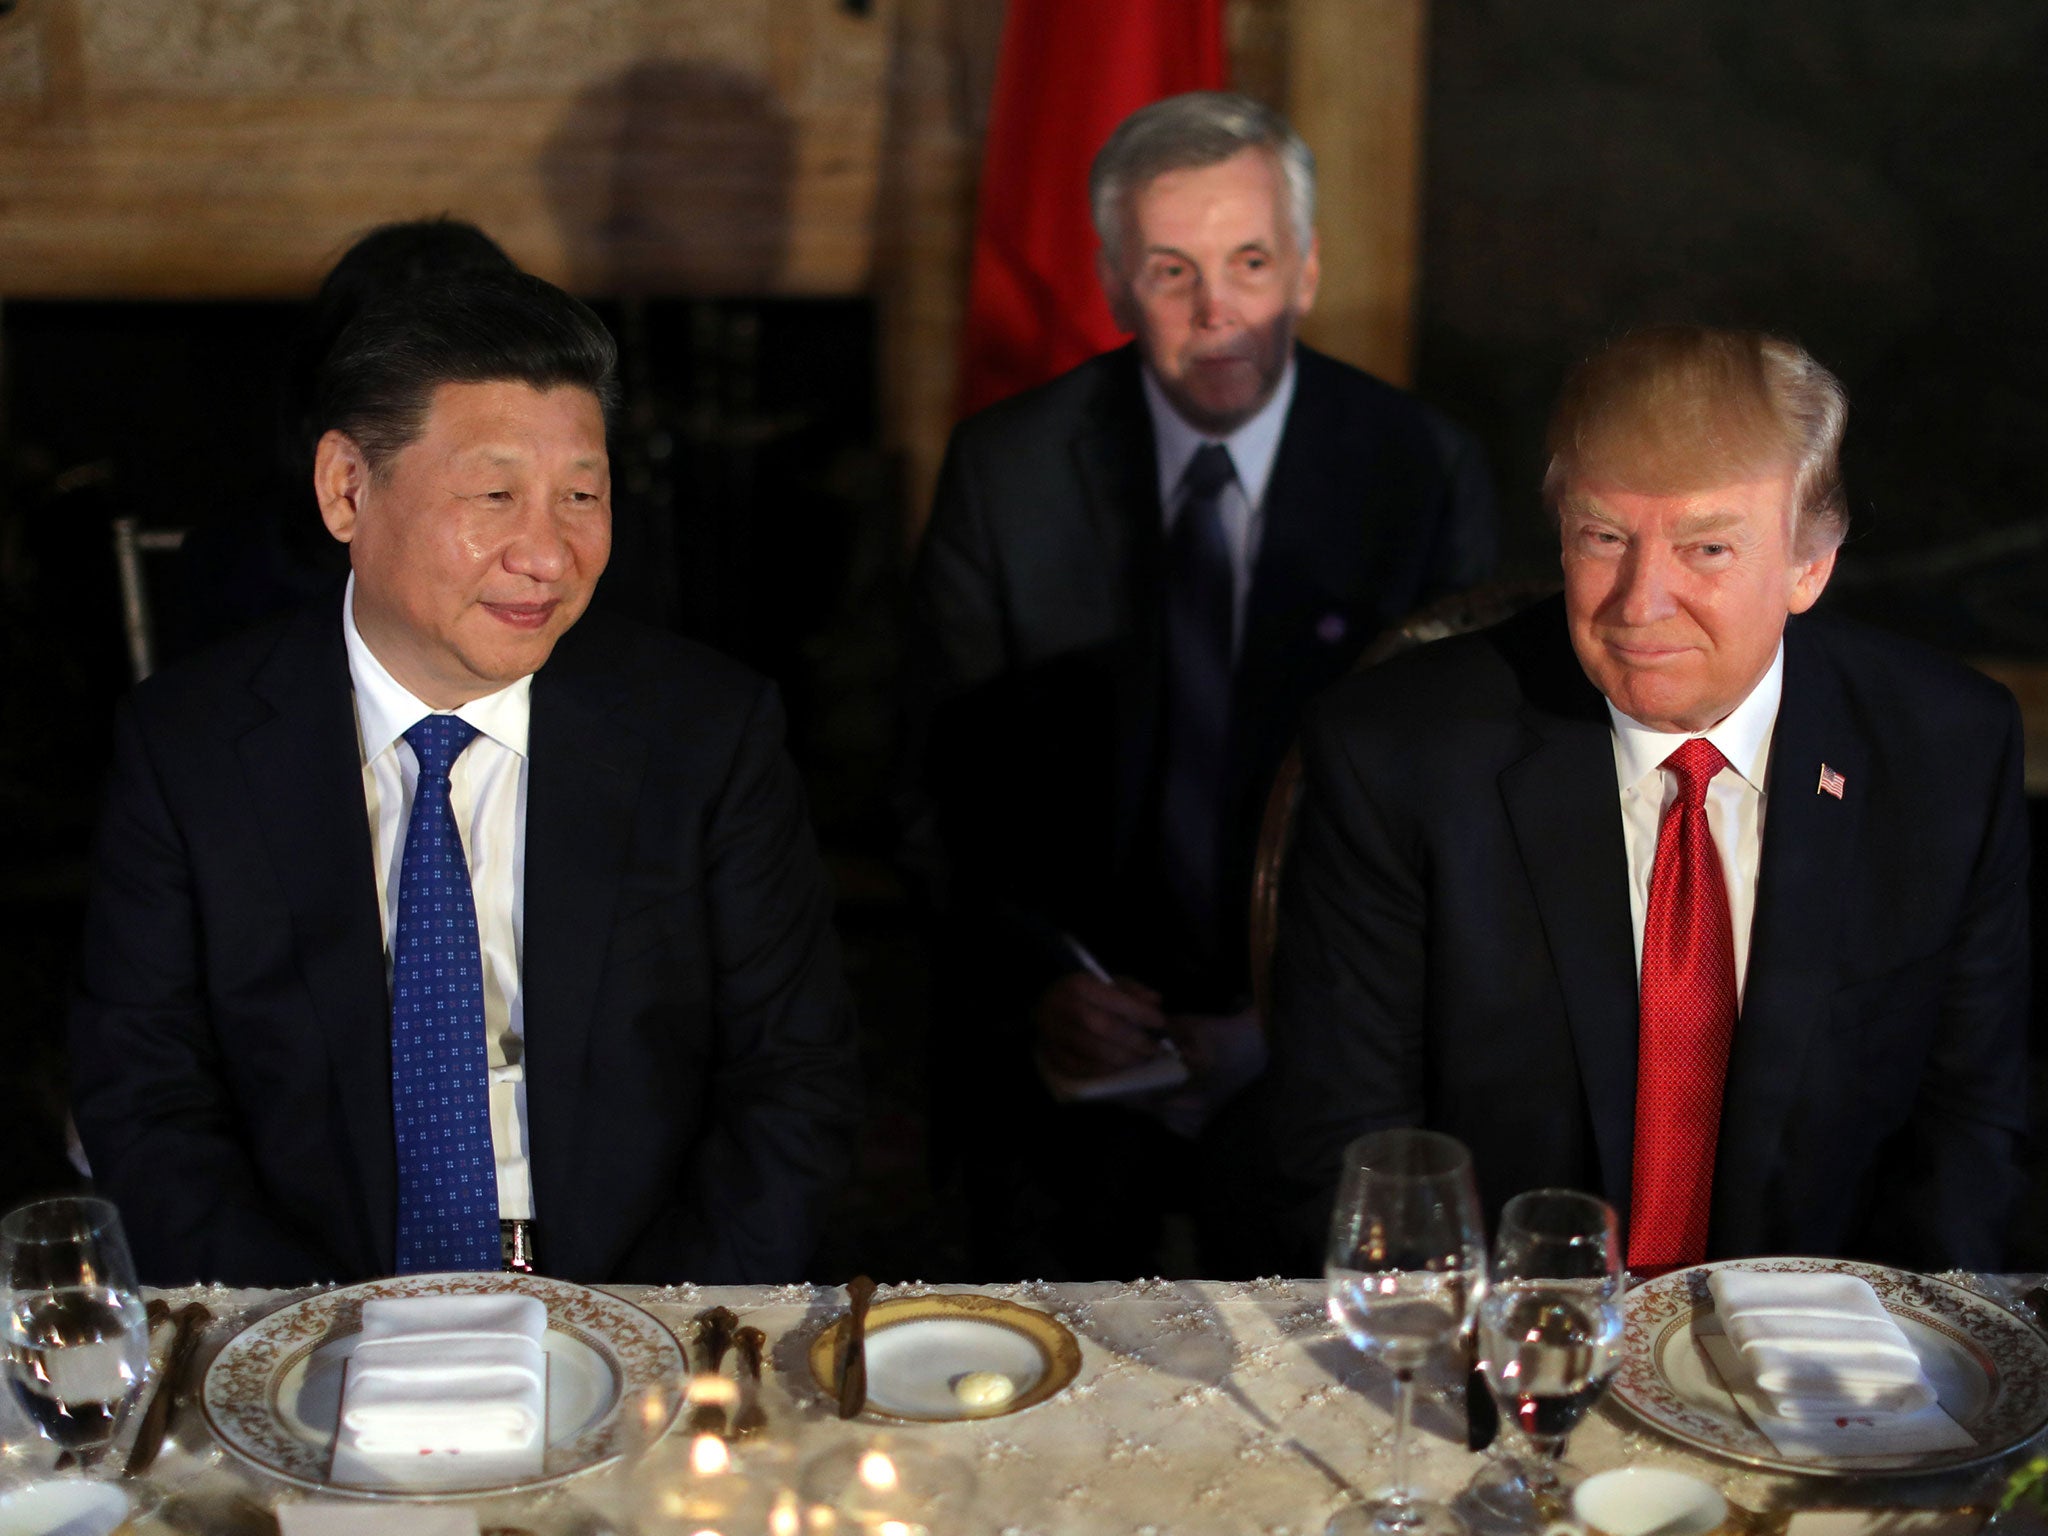 Donald Trump said he and the Chinese President were enjoying chocolate cake when he broke the news of the US air strikes against Syria to him